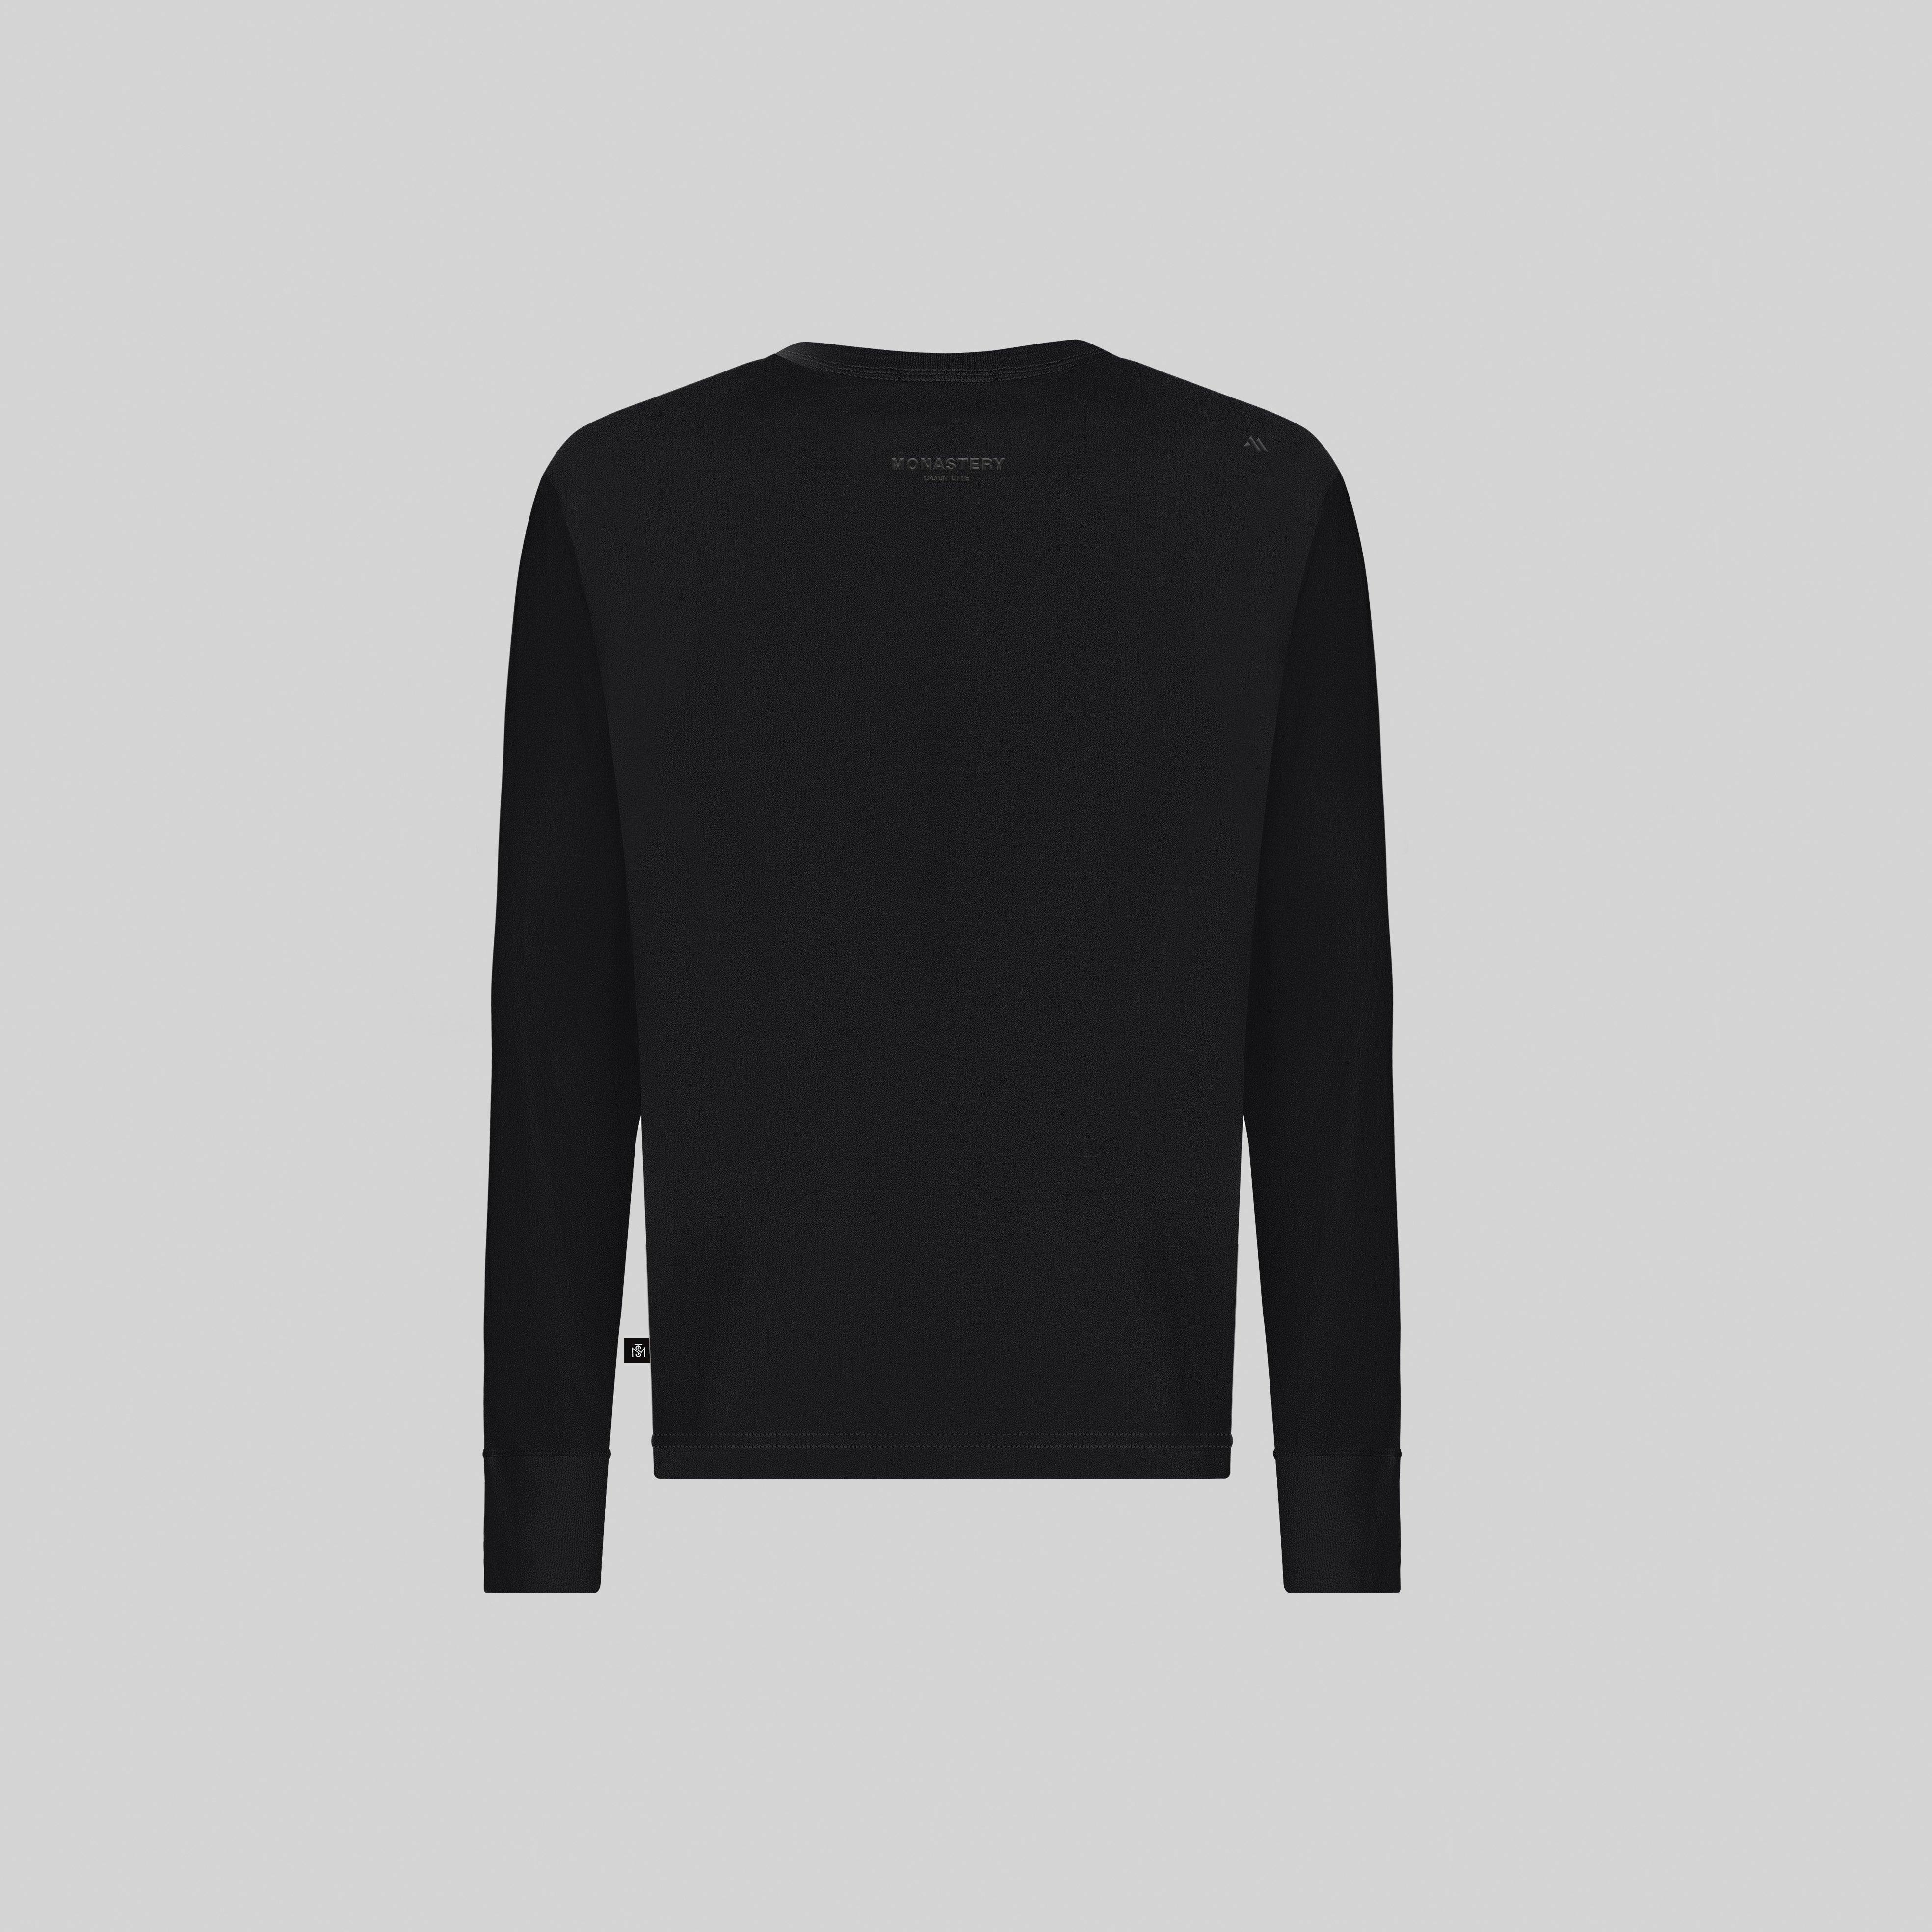 HASEN BLACK LONG SLEEVE | Monastery Couture